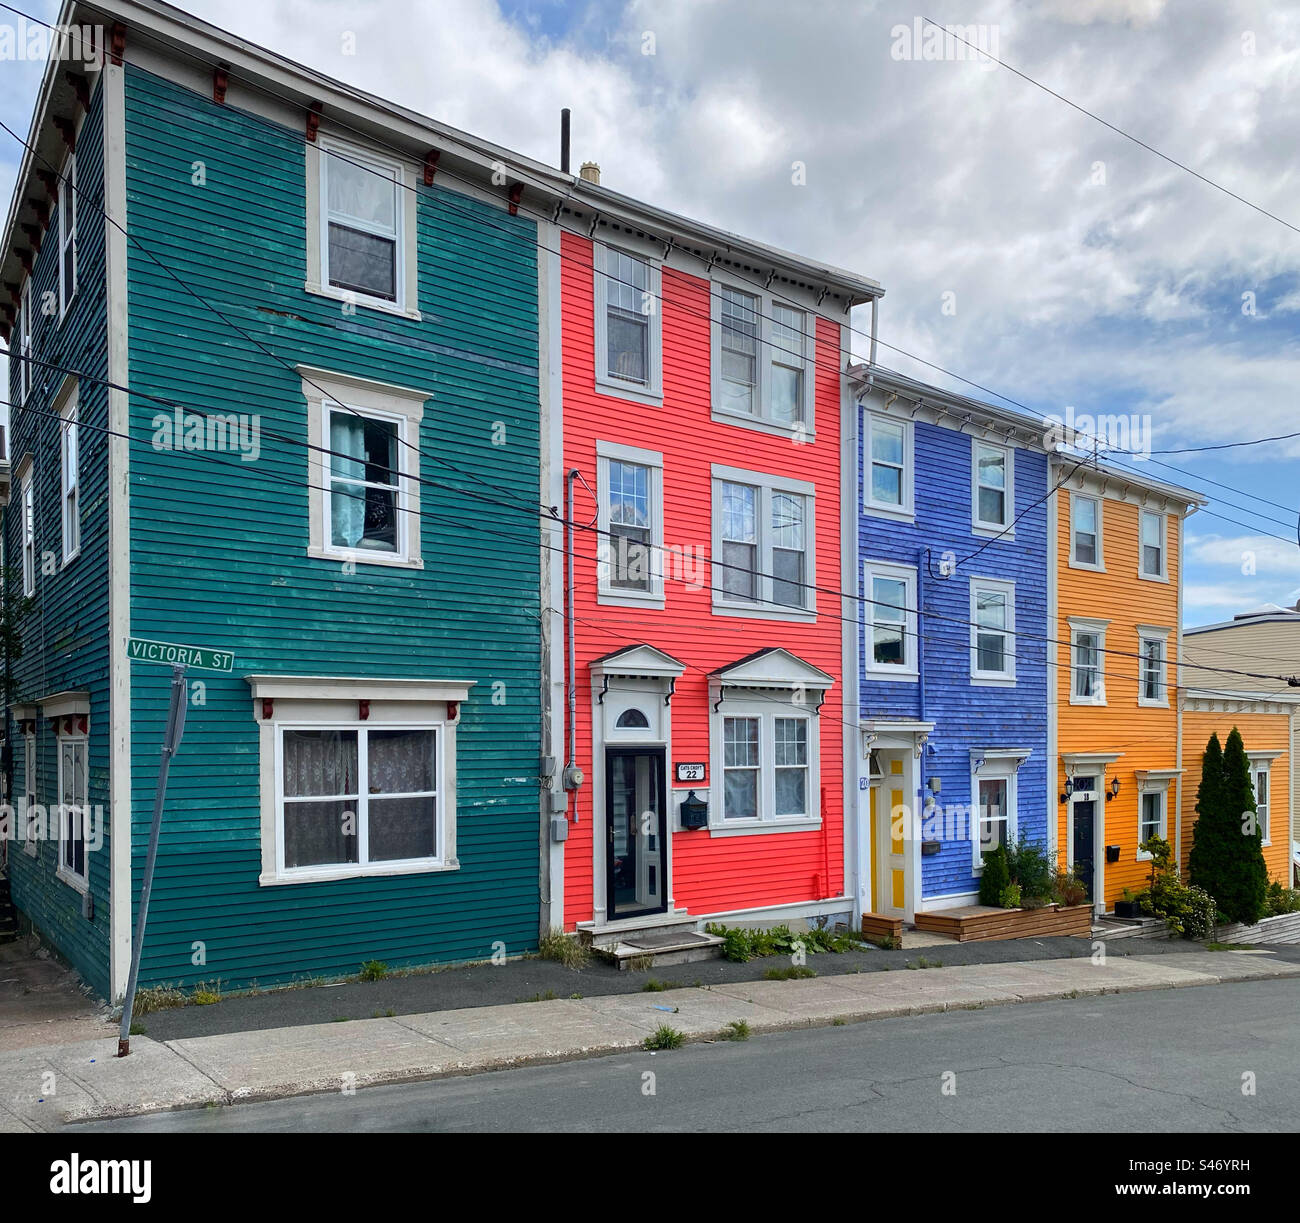 Colorfully painted row houses on Victoria Street in Saint John’s, Newfoundland Stock Photo